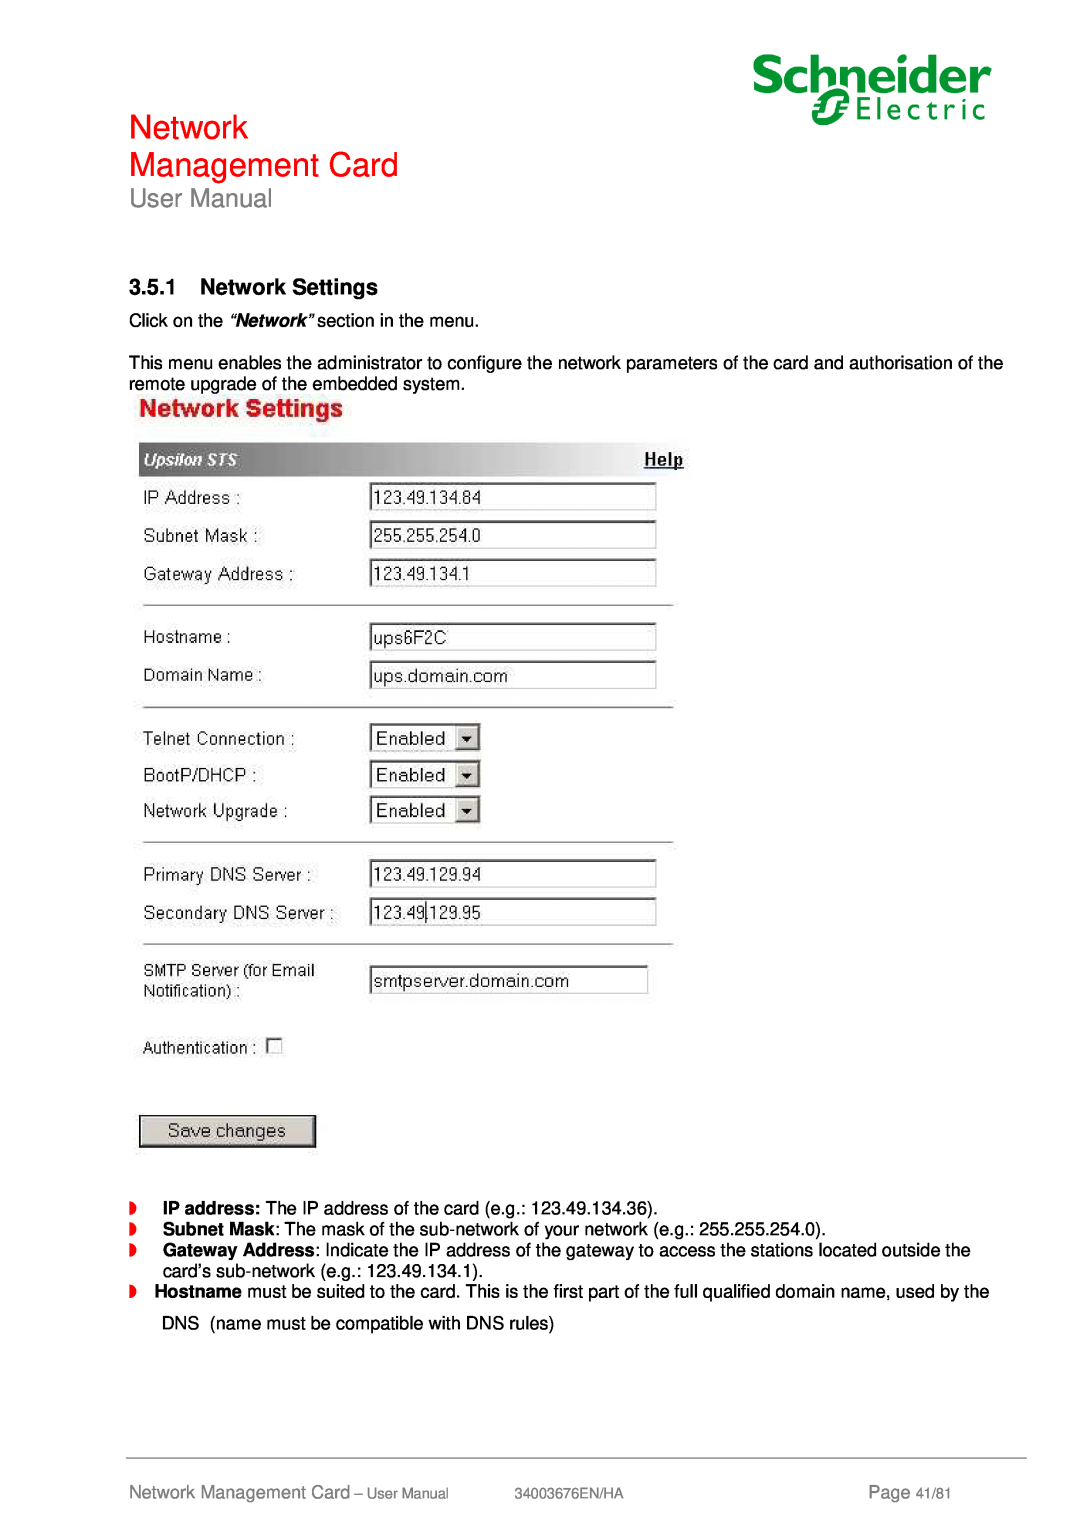 Schneider Electric 66074, 66846 user manual Network Settings, Network Management Card - User Manual, Page 41/81 